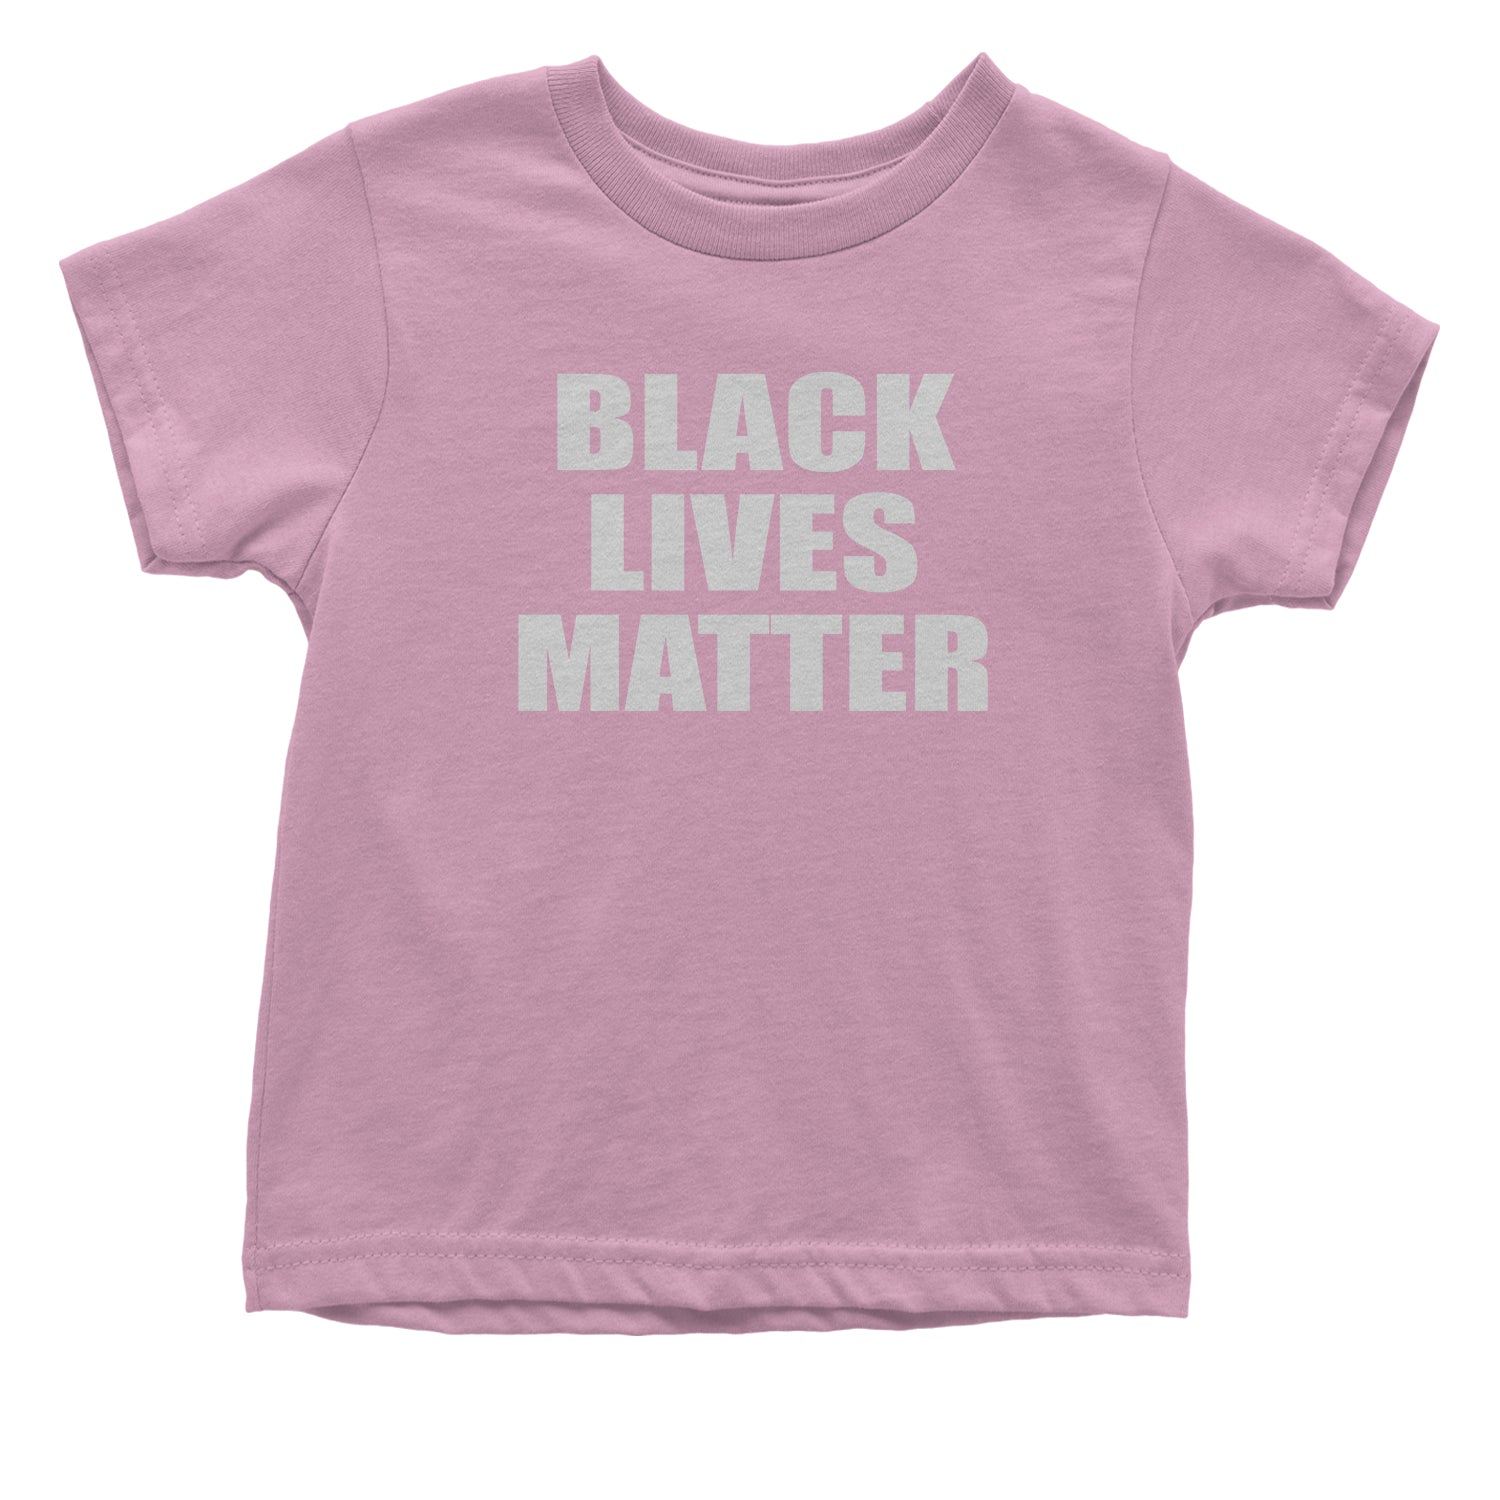 Black Lives Matter BLM Infant One-Piece Romper Bodysuit and Toddler T-shirt african, africanamerican, ahmaud, american, arberry, breonna, brutality, end, justice, taylor by Expression Tees